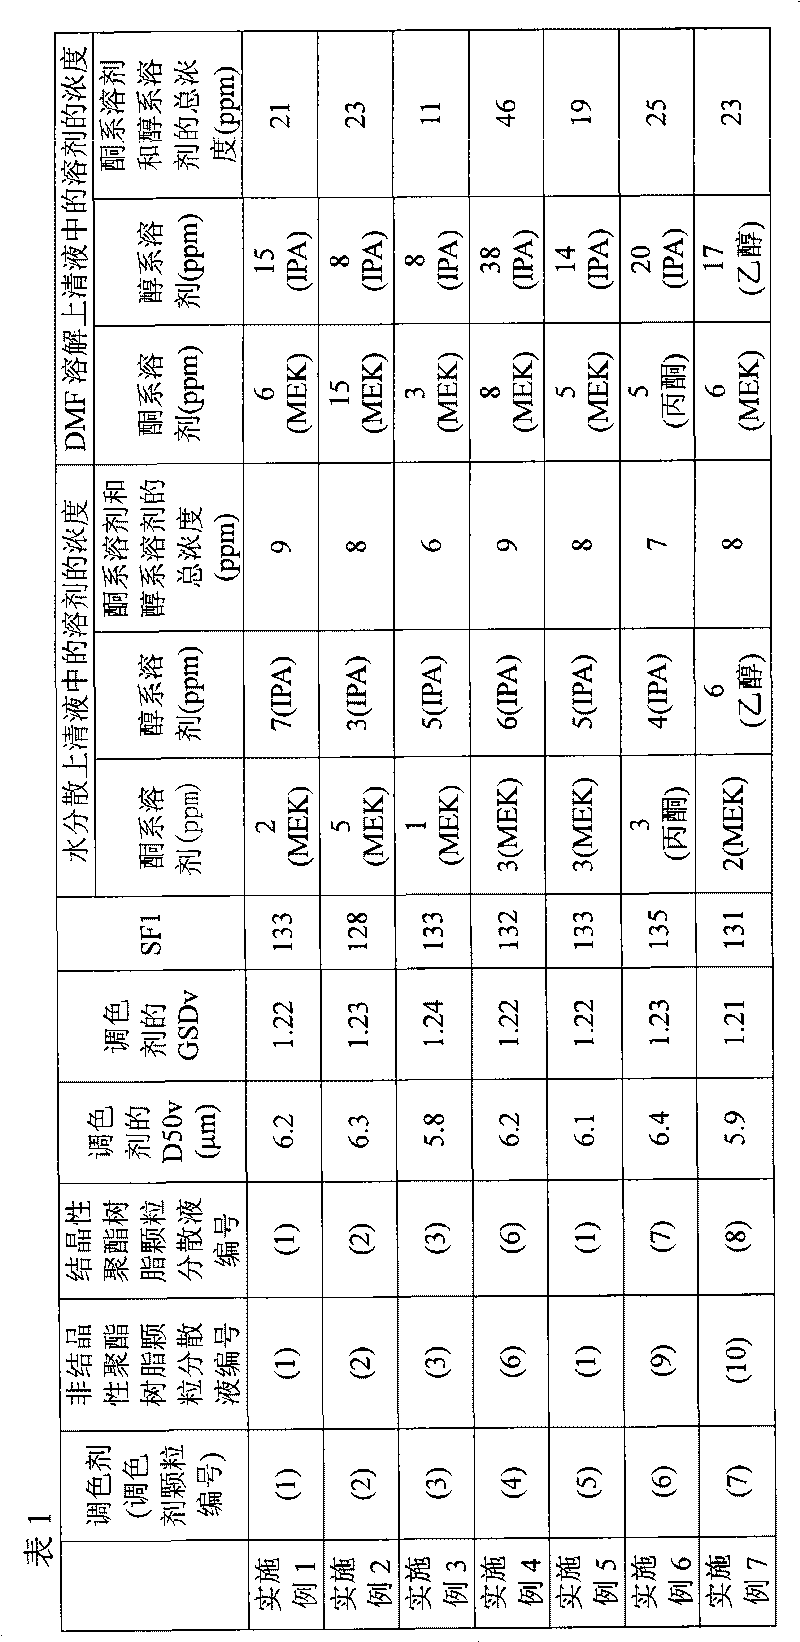 Toner for developing electrostatic charge image, developer for developing an electrostatic charge image, toner cartridge, process cartridge, and image forming apparatus